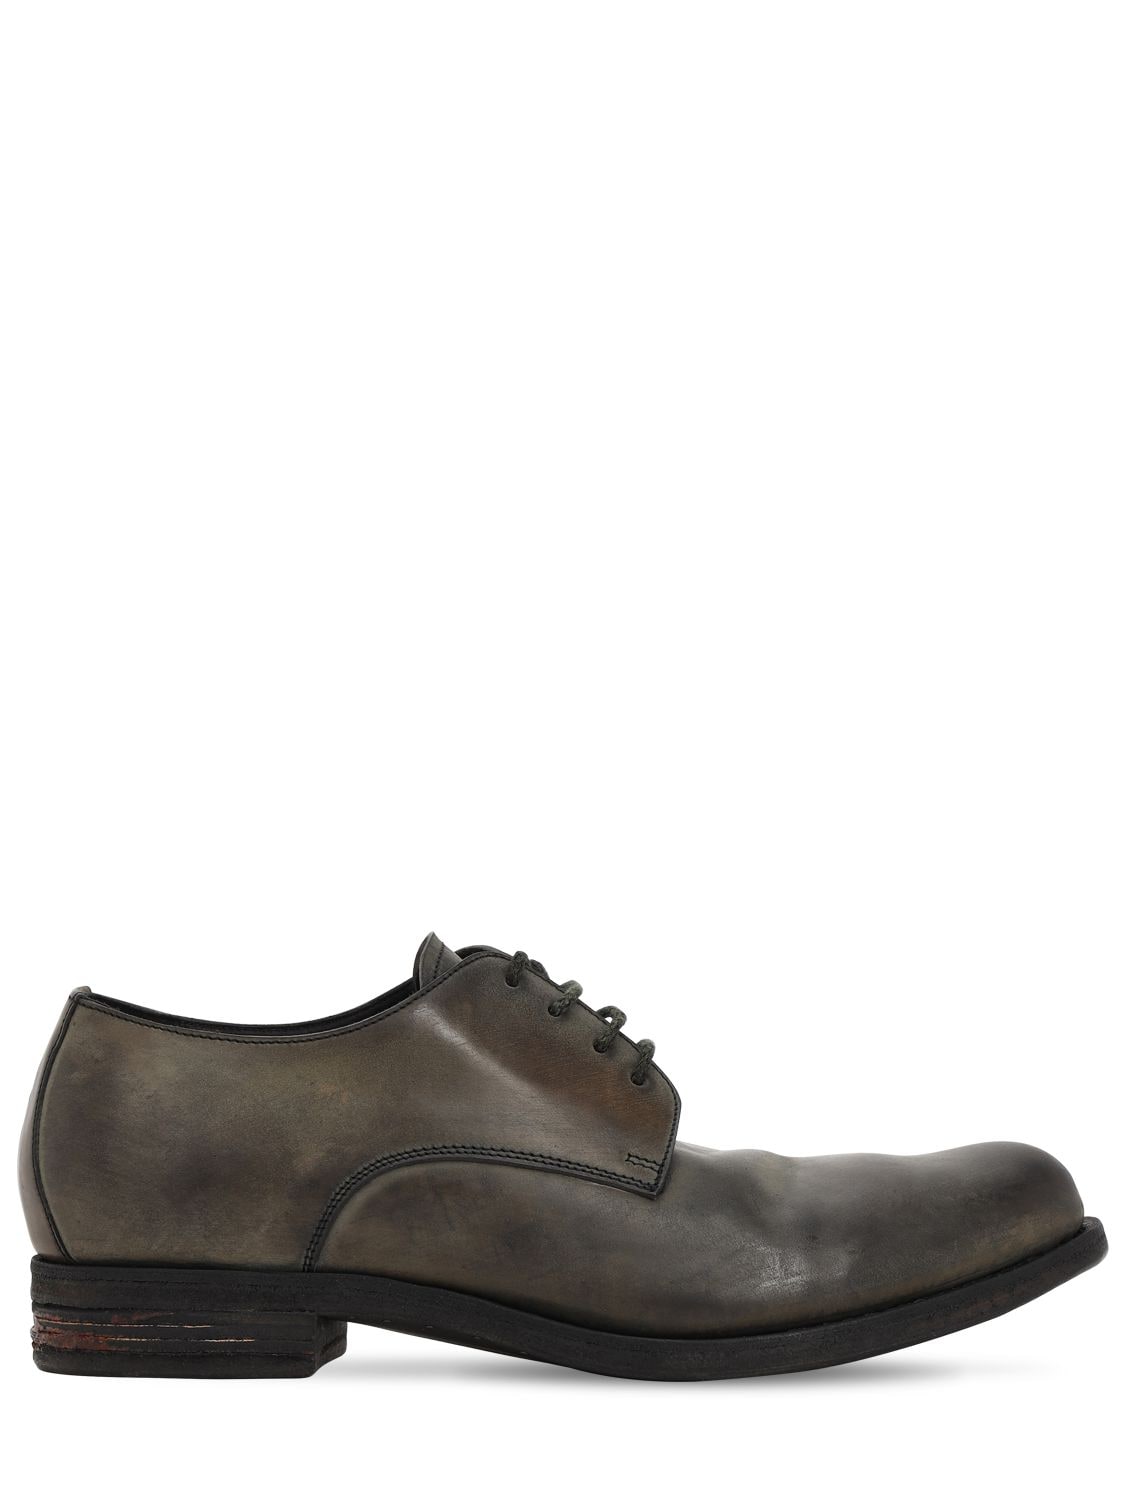 Adiciannoveventitre Handmade Leather Derby Shoes In Washed Black